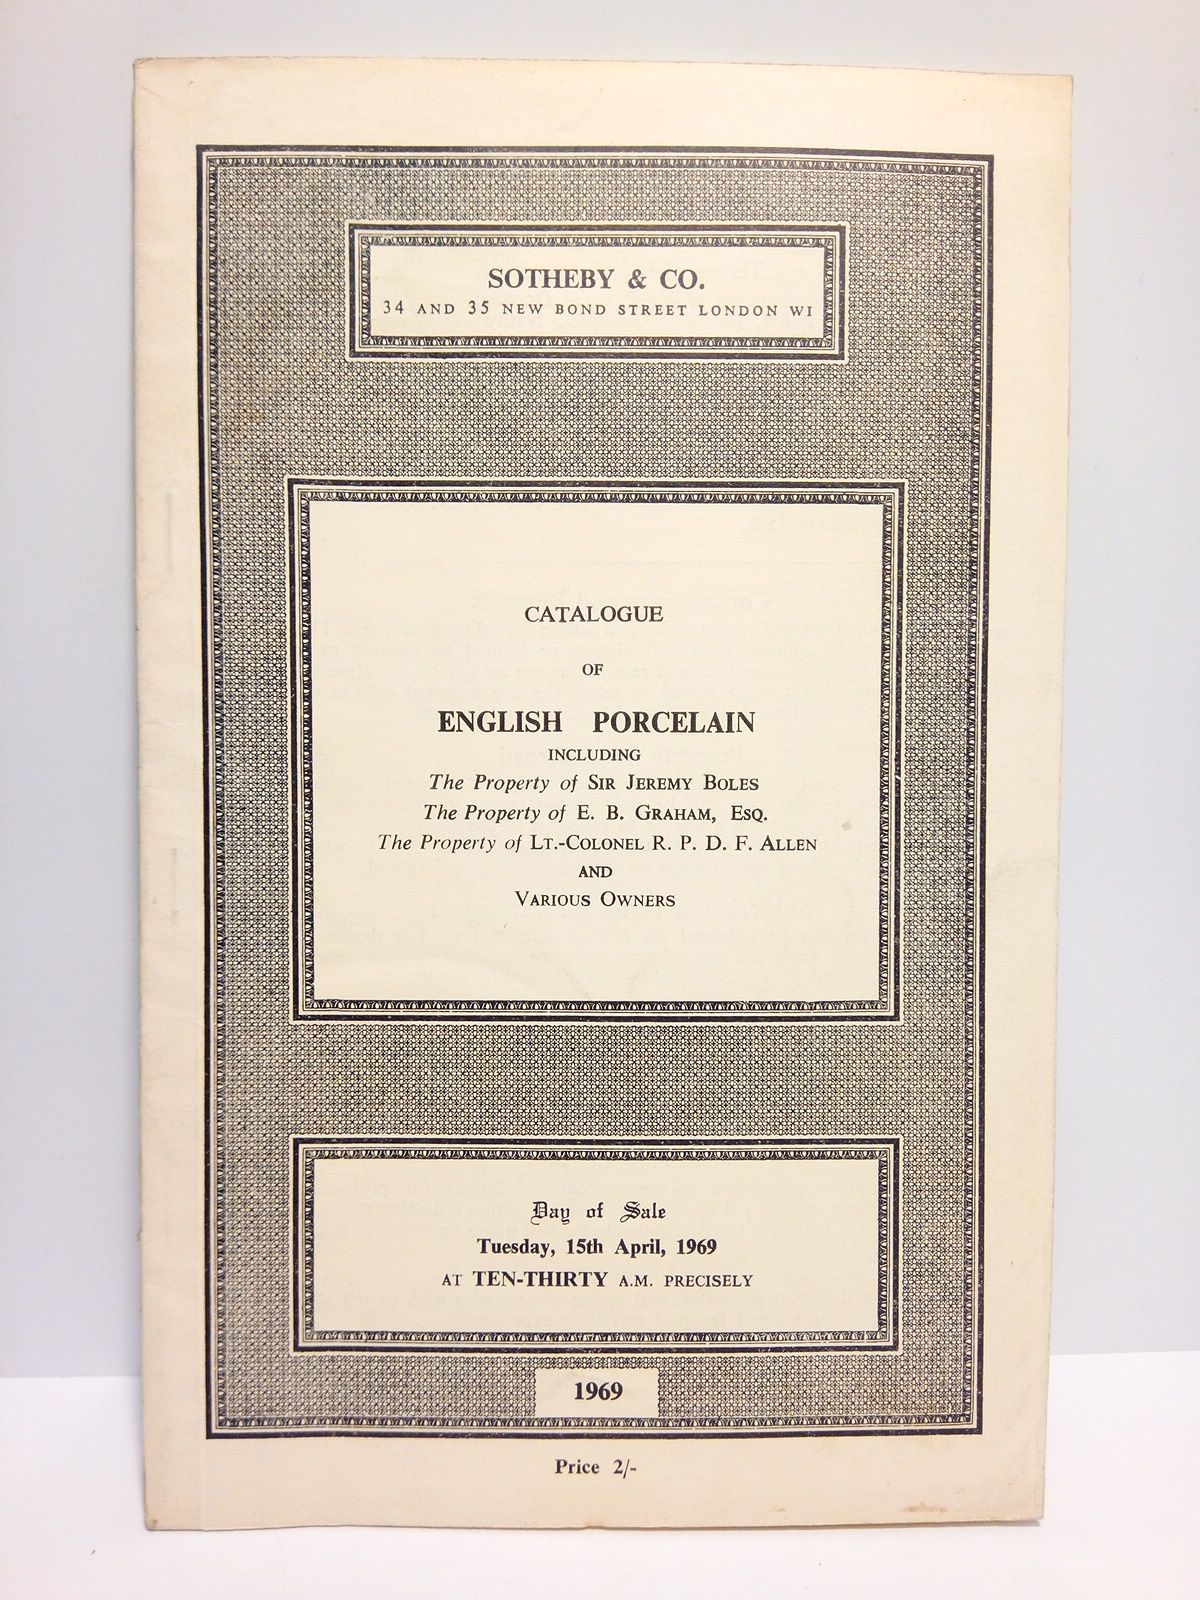 SOTHEBY & CO. - Catalogue of English Porcelain... and Services.... (Auction on Tuesday, 15th April, 1969)